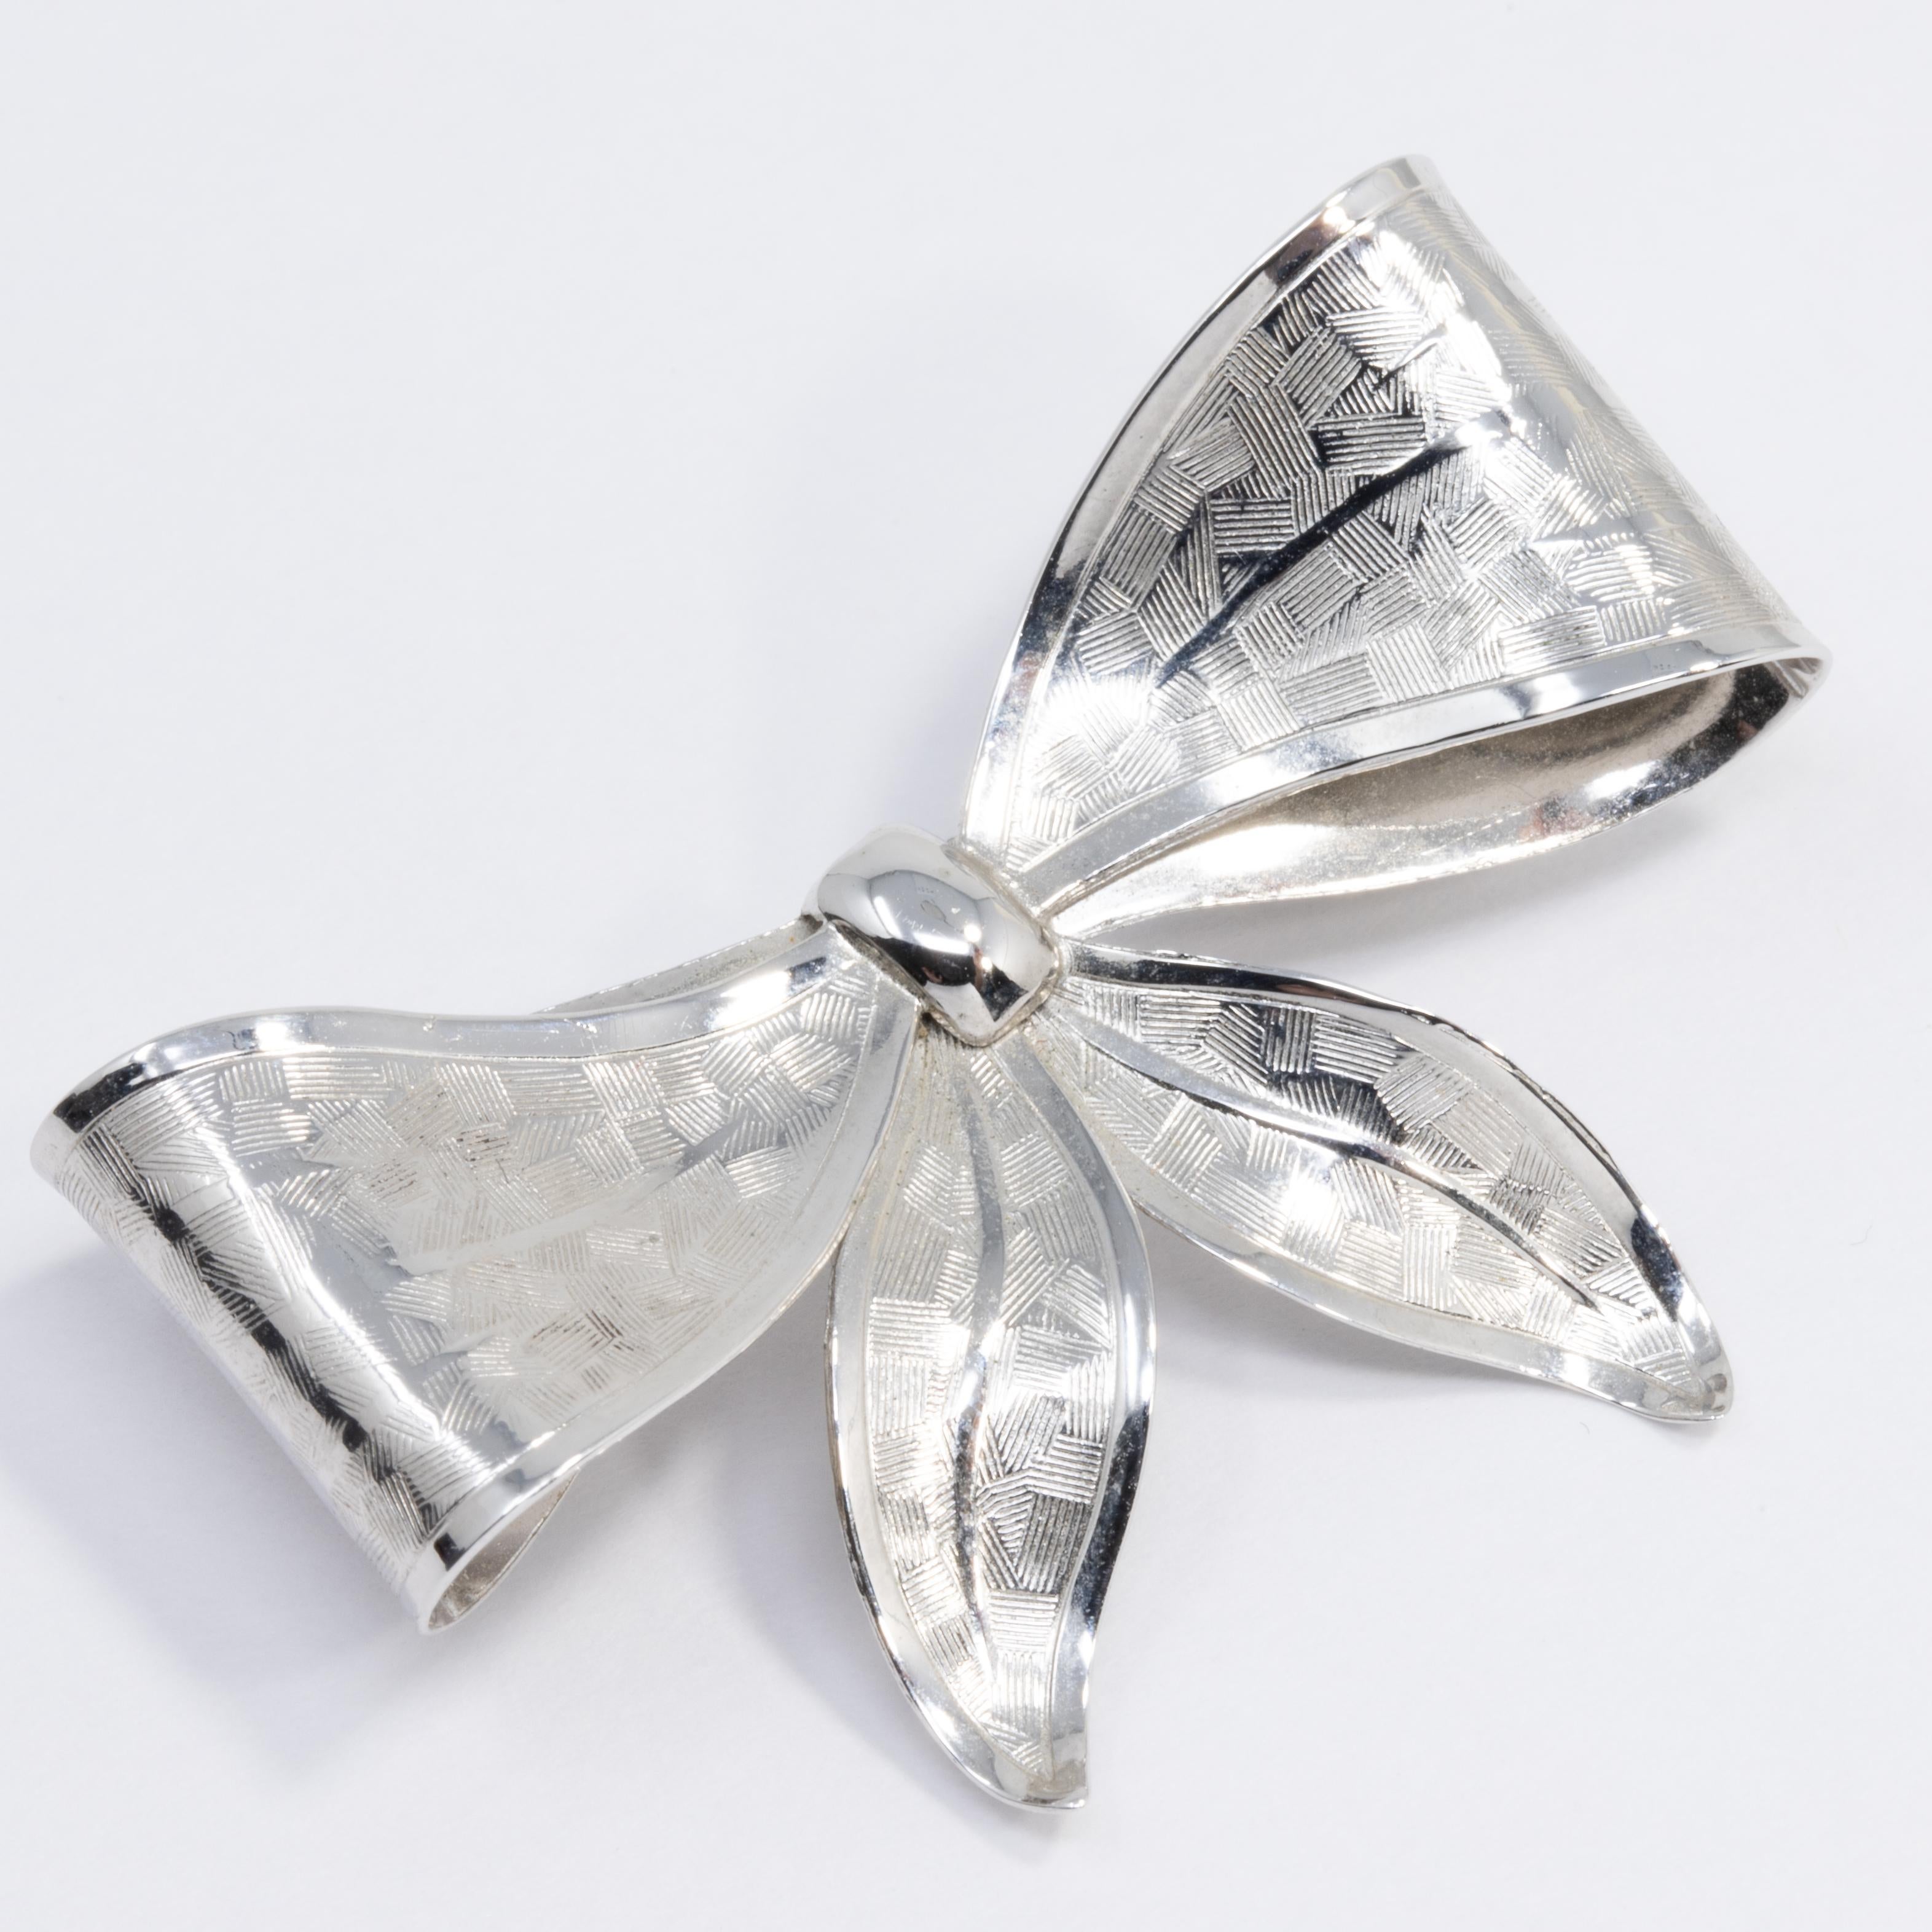 An elegant sterling silver vintage bow pin.

Hallmarks: Co Sterling